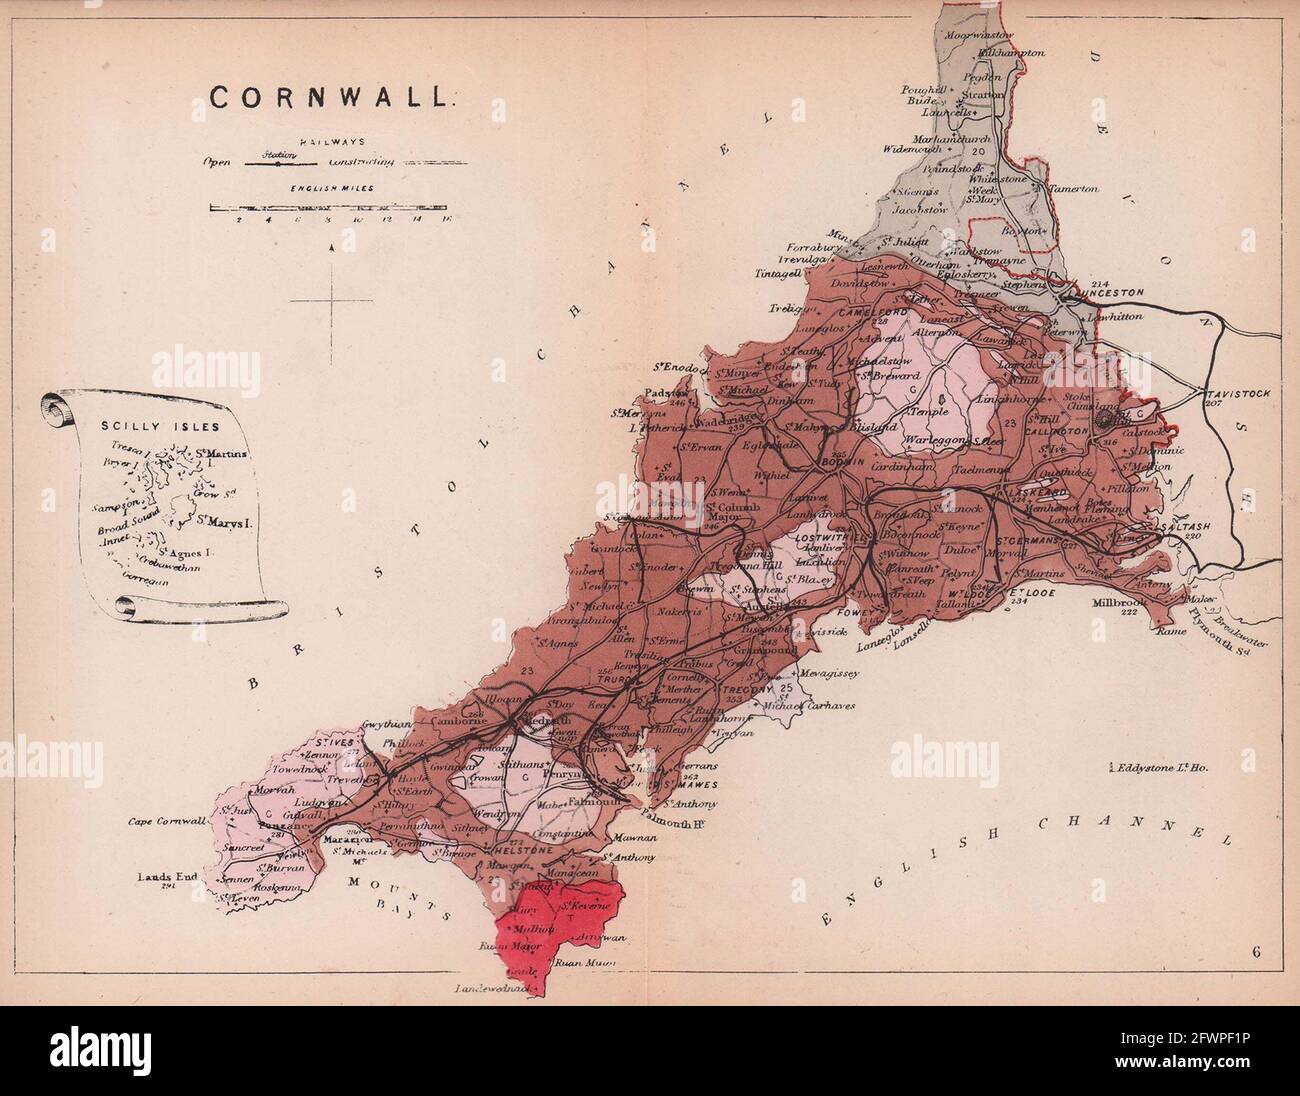 CORNWALL antique geological county map by James Reynolds 1864 Stock Photo